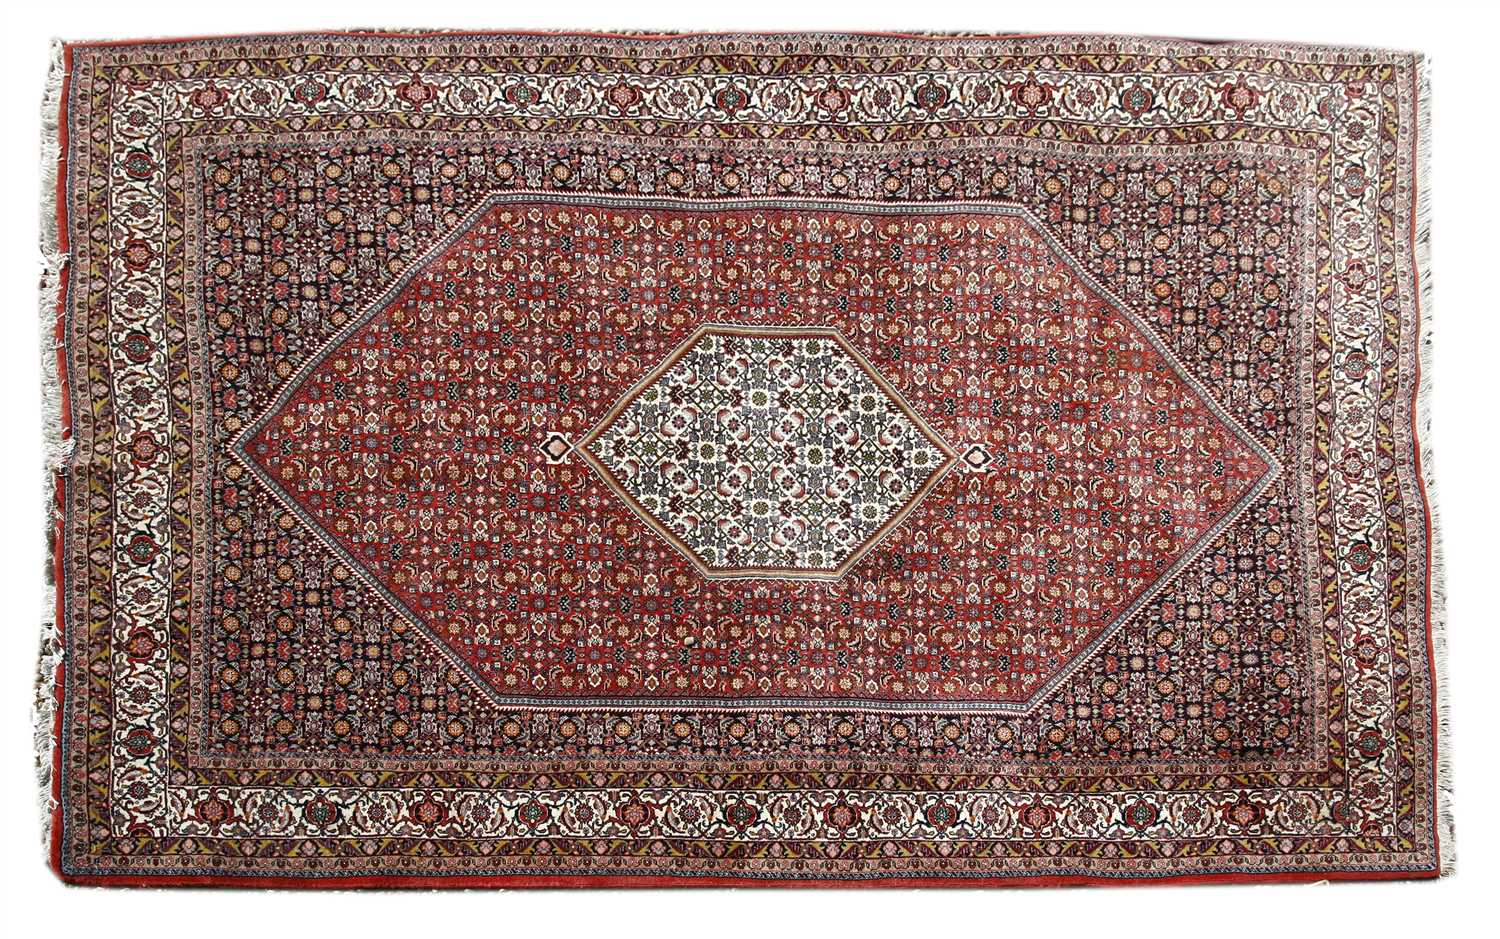 A South West Persian red and navy ground rug